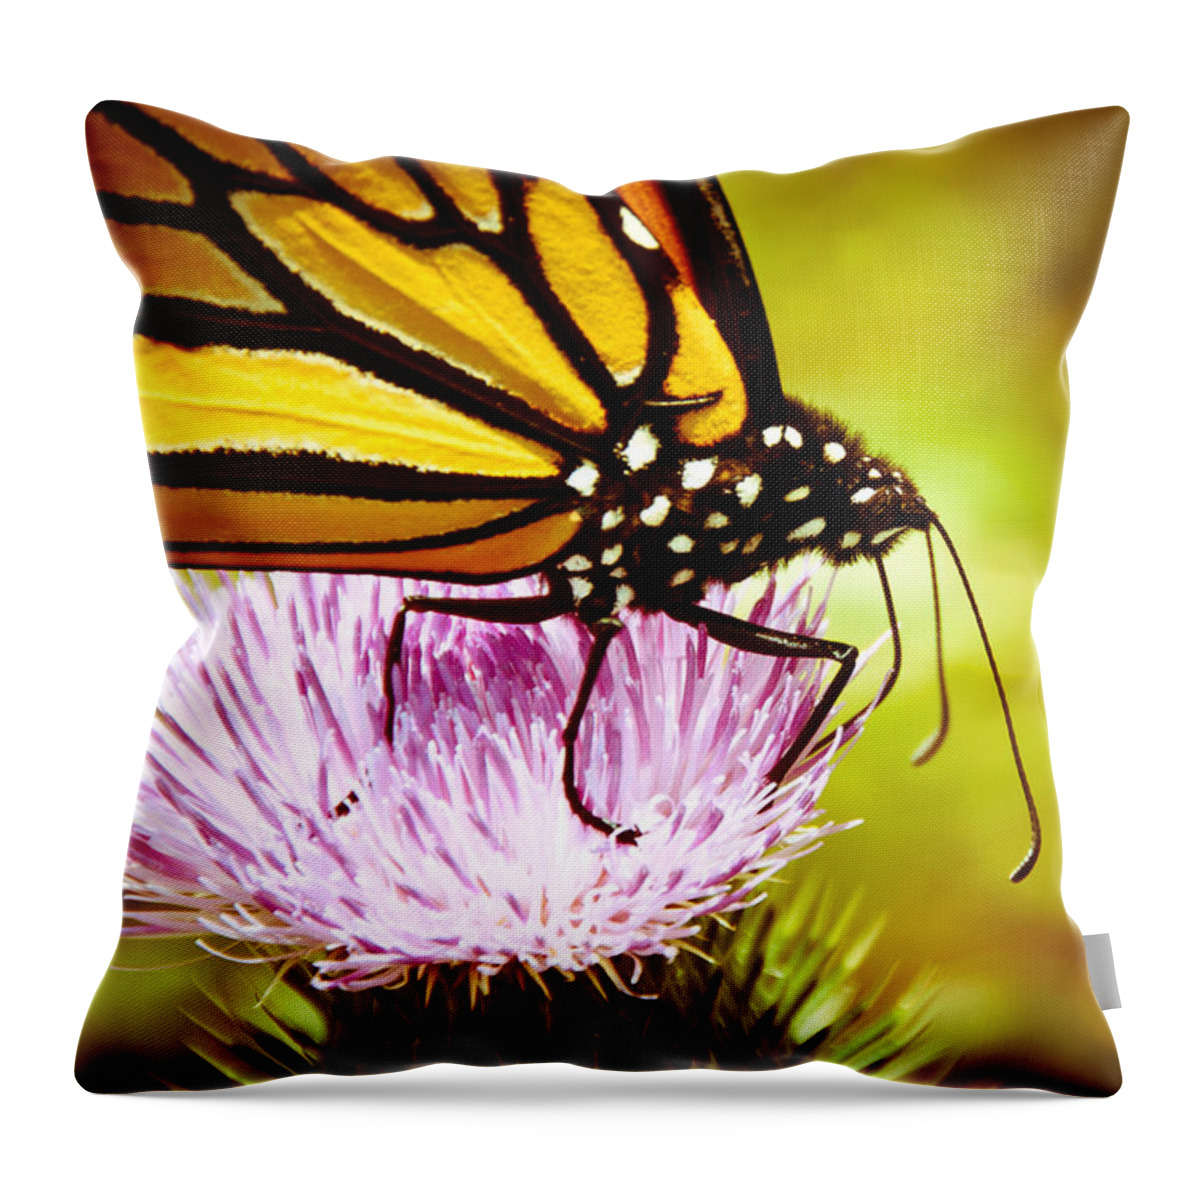 Monarch Throw Pillow featuring the photograph Busy Butterfly by Cheryl Baxter